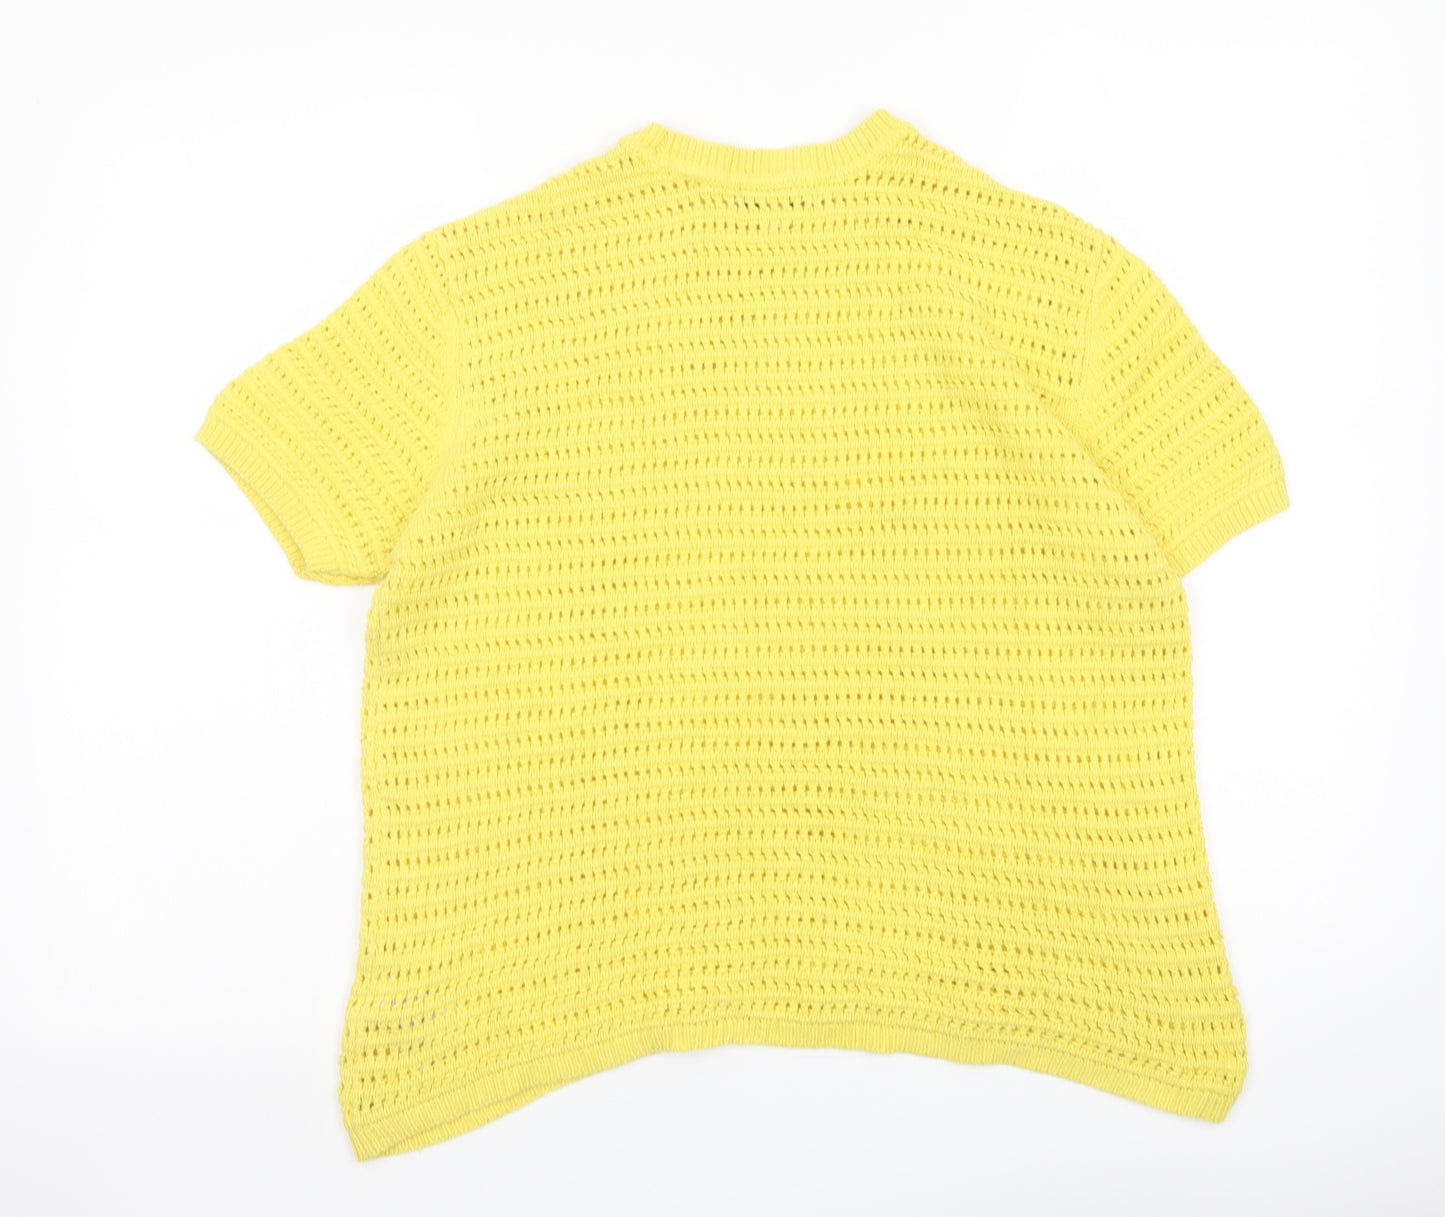 Marks and Spencer Womens Yellow Crew Neck Cotton Pullover Jumper Size M